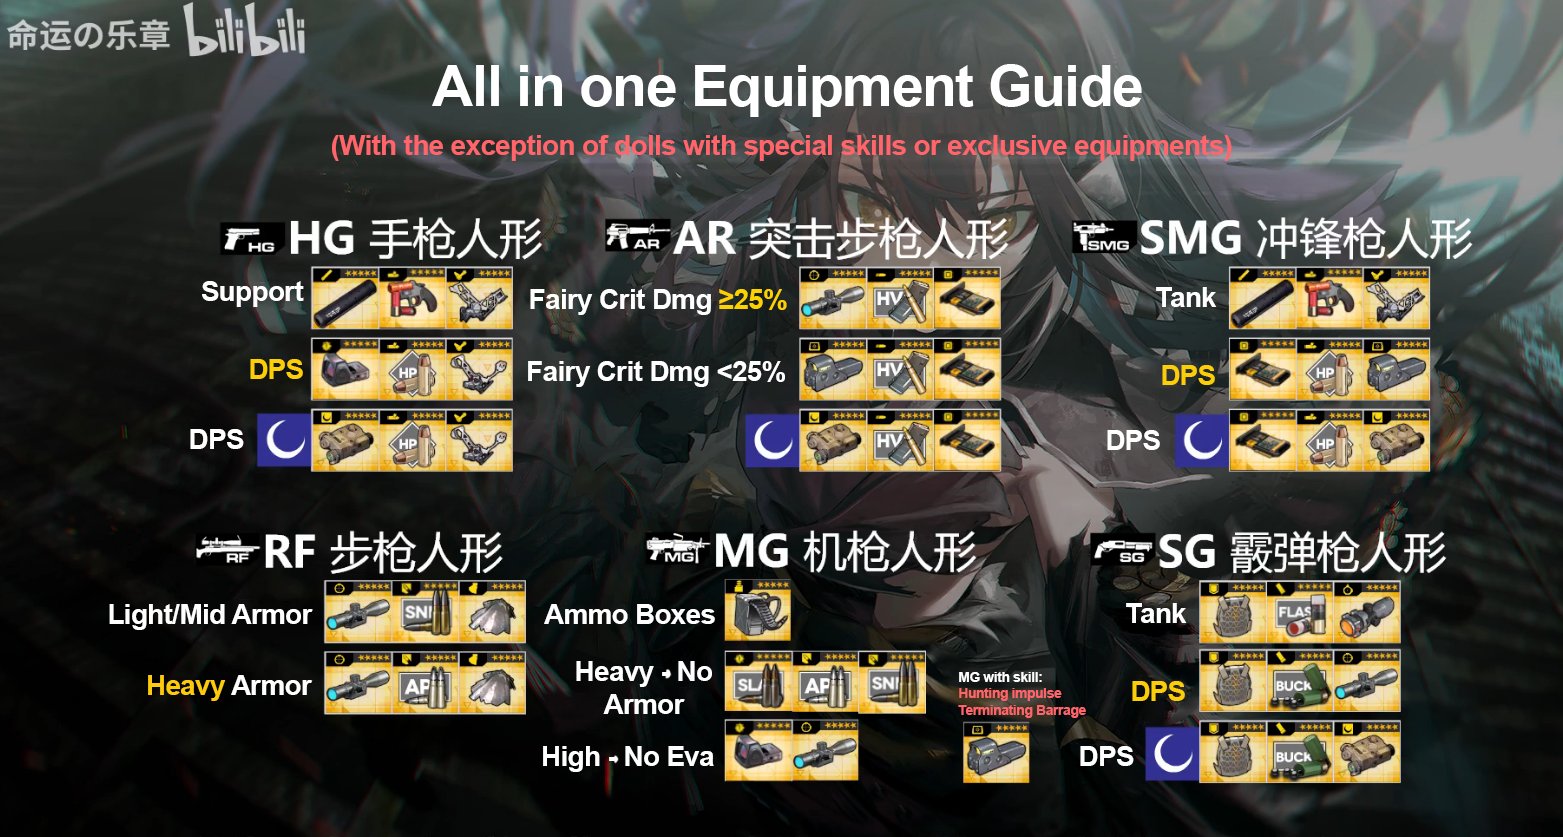 Recommendations by weapon type